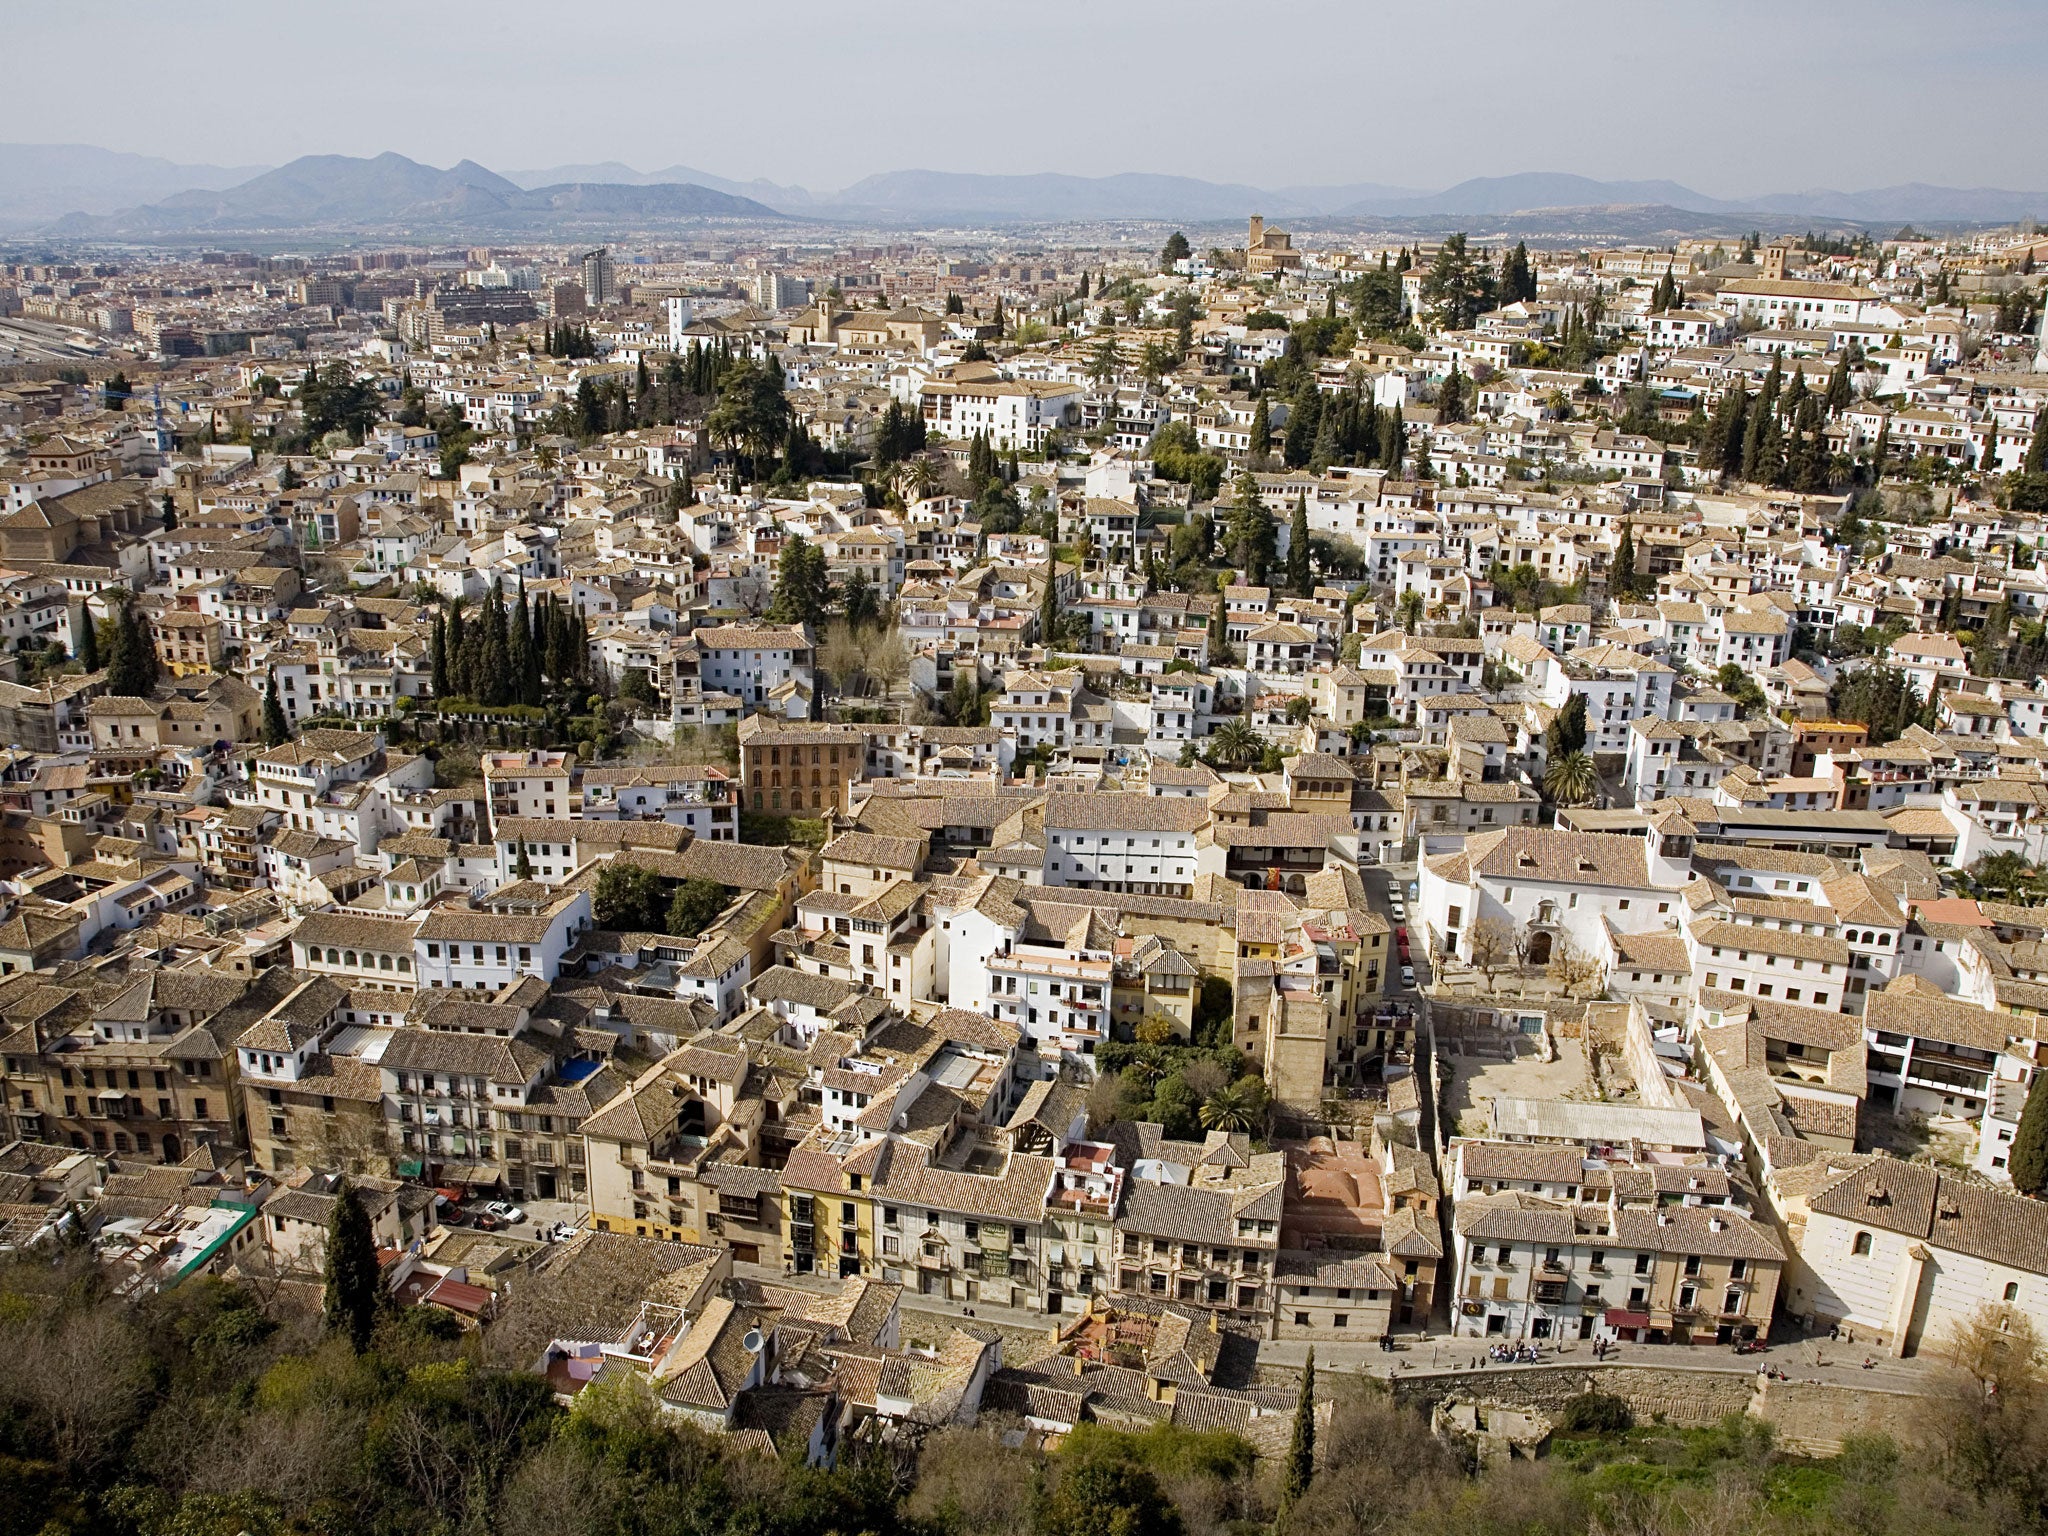 Tolerant: the Albayzín quarter of the Andalusian city of Granada was a multicultural melting pot in Moorish times